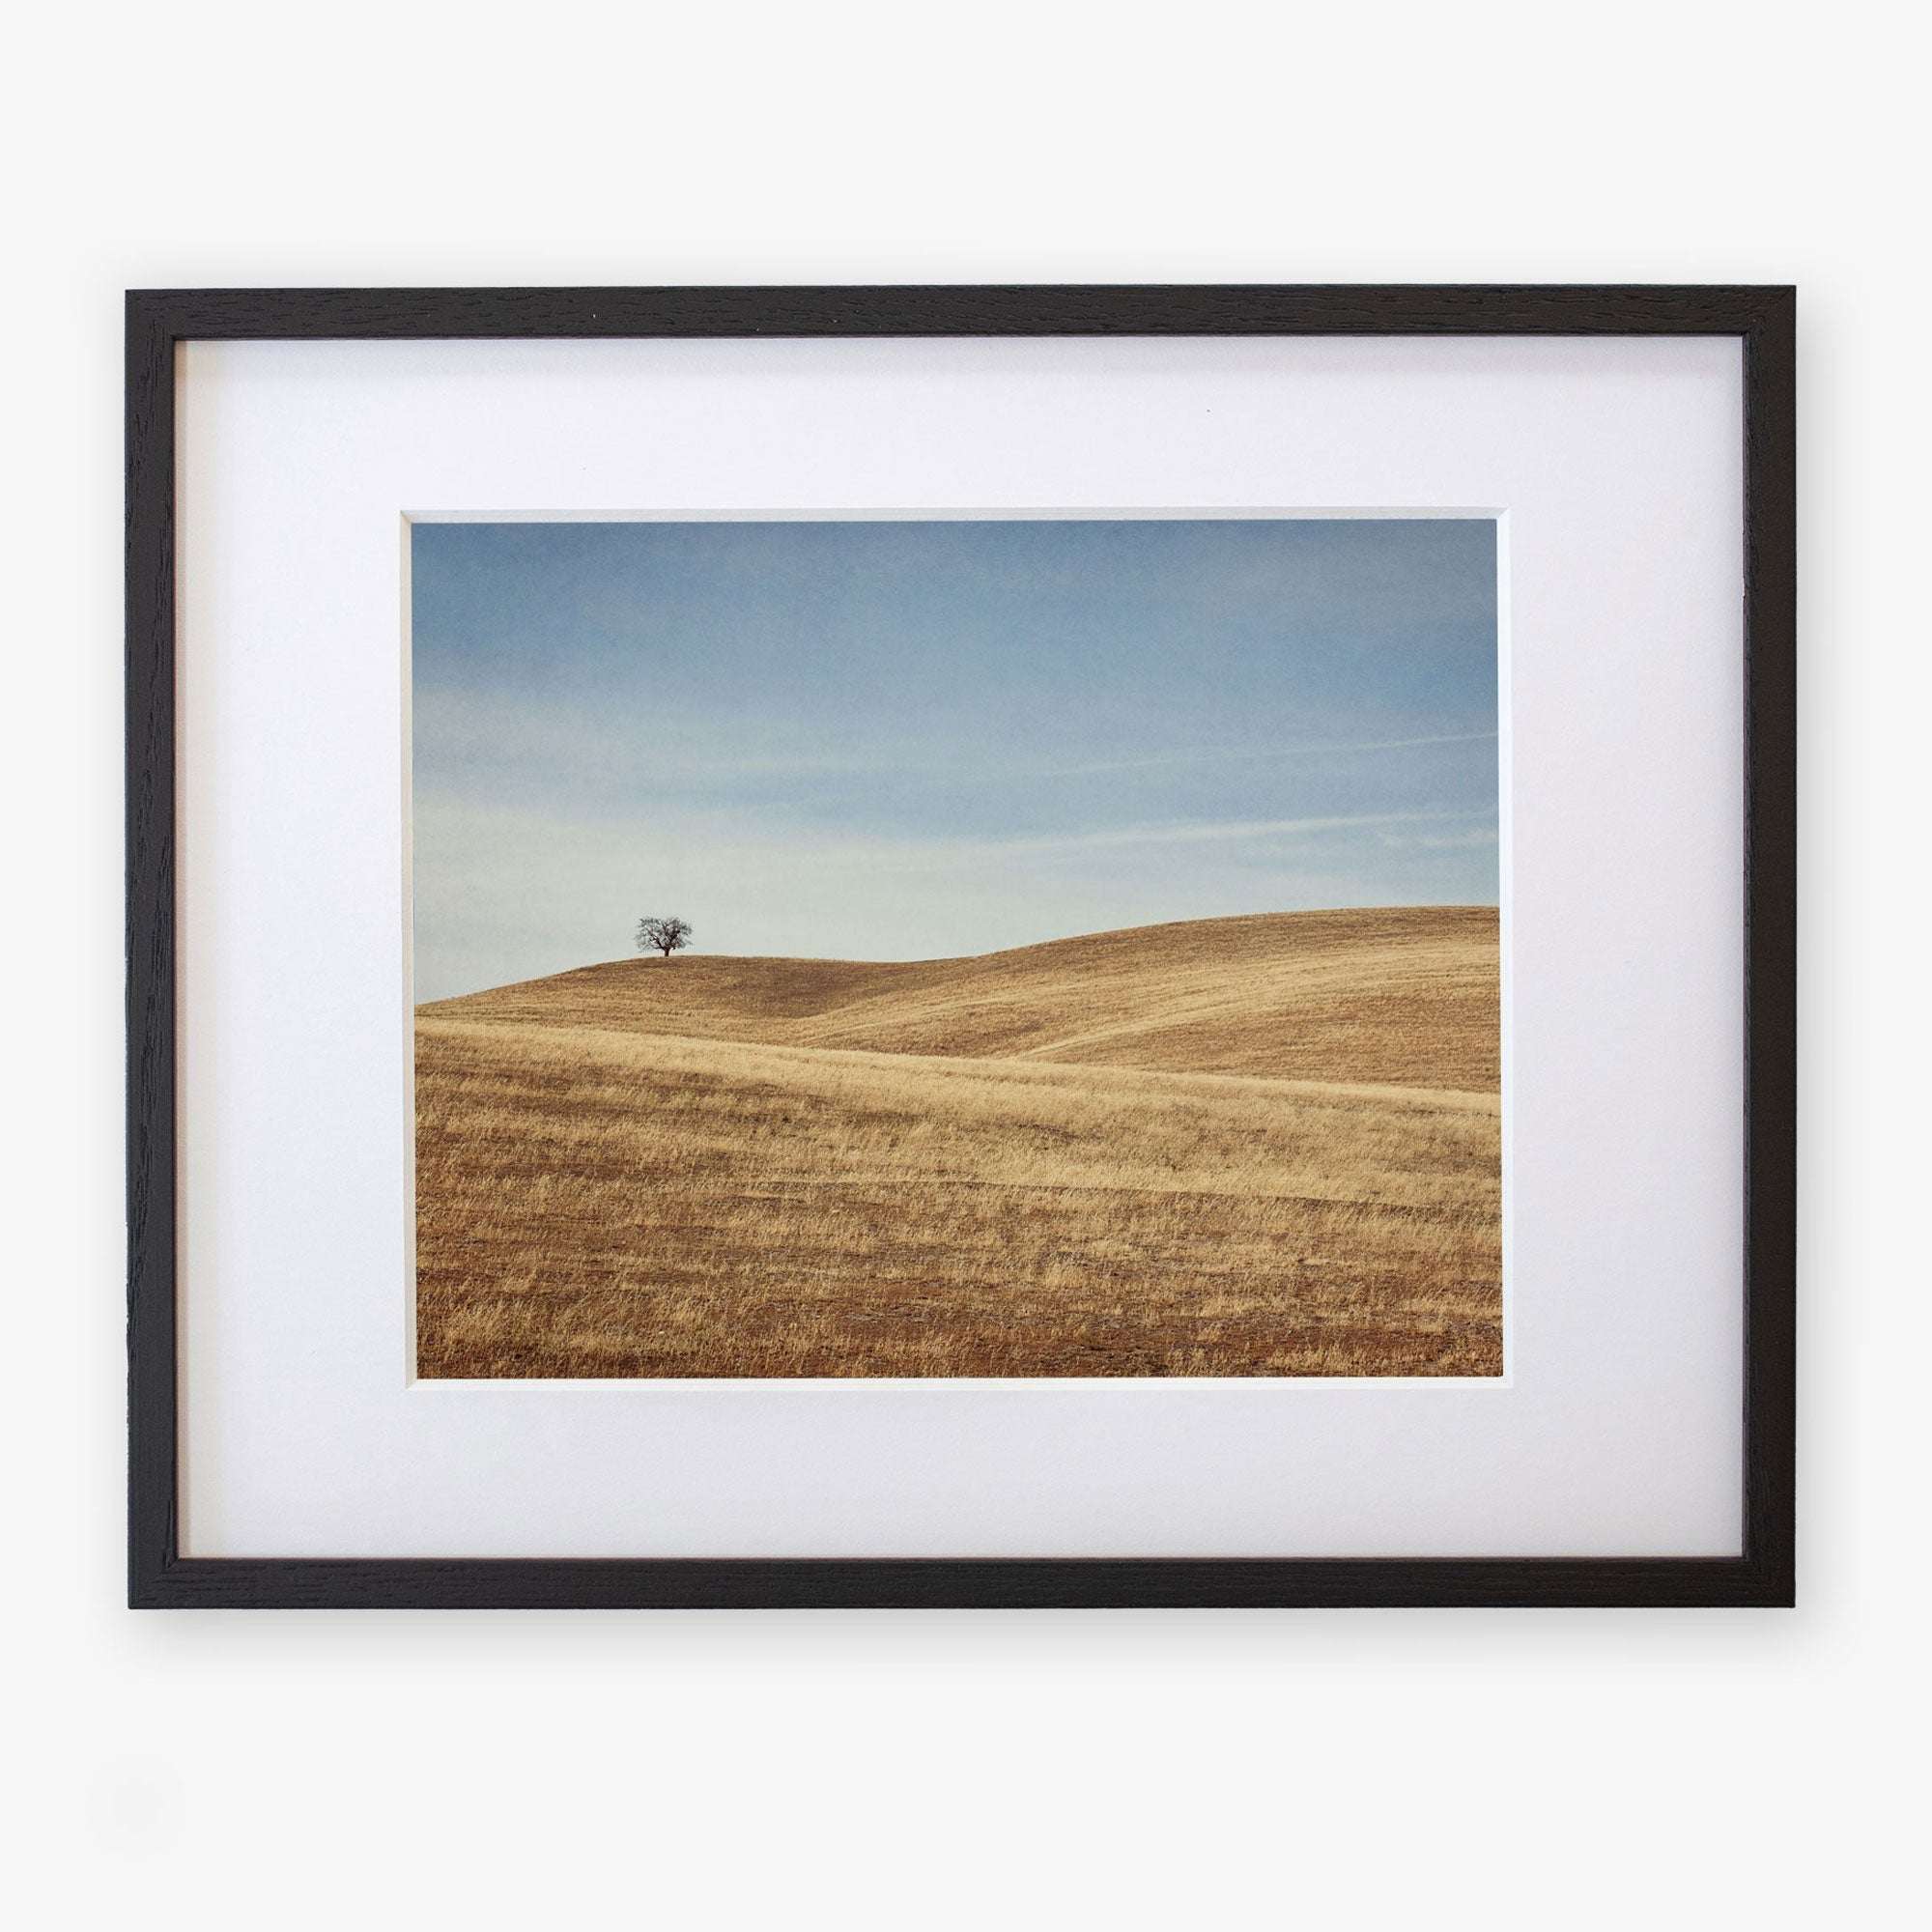 A framed photograph of a lone tree on a gently rolling, golden-brown grassy hill in the Santa Ynez Valley under a clear sky. The frame is black with a white mat. Offley Green&#39;s California Central Coast Landscape Print &#39;Golden Ynez&#39;.